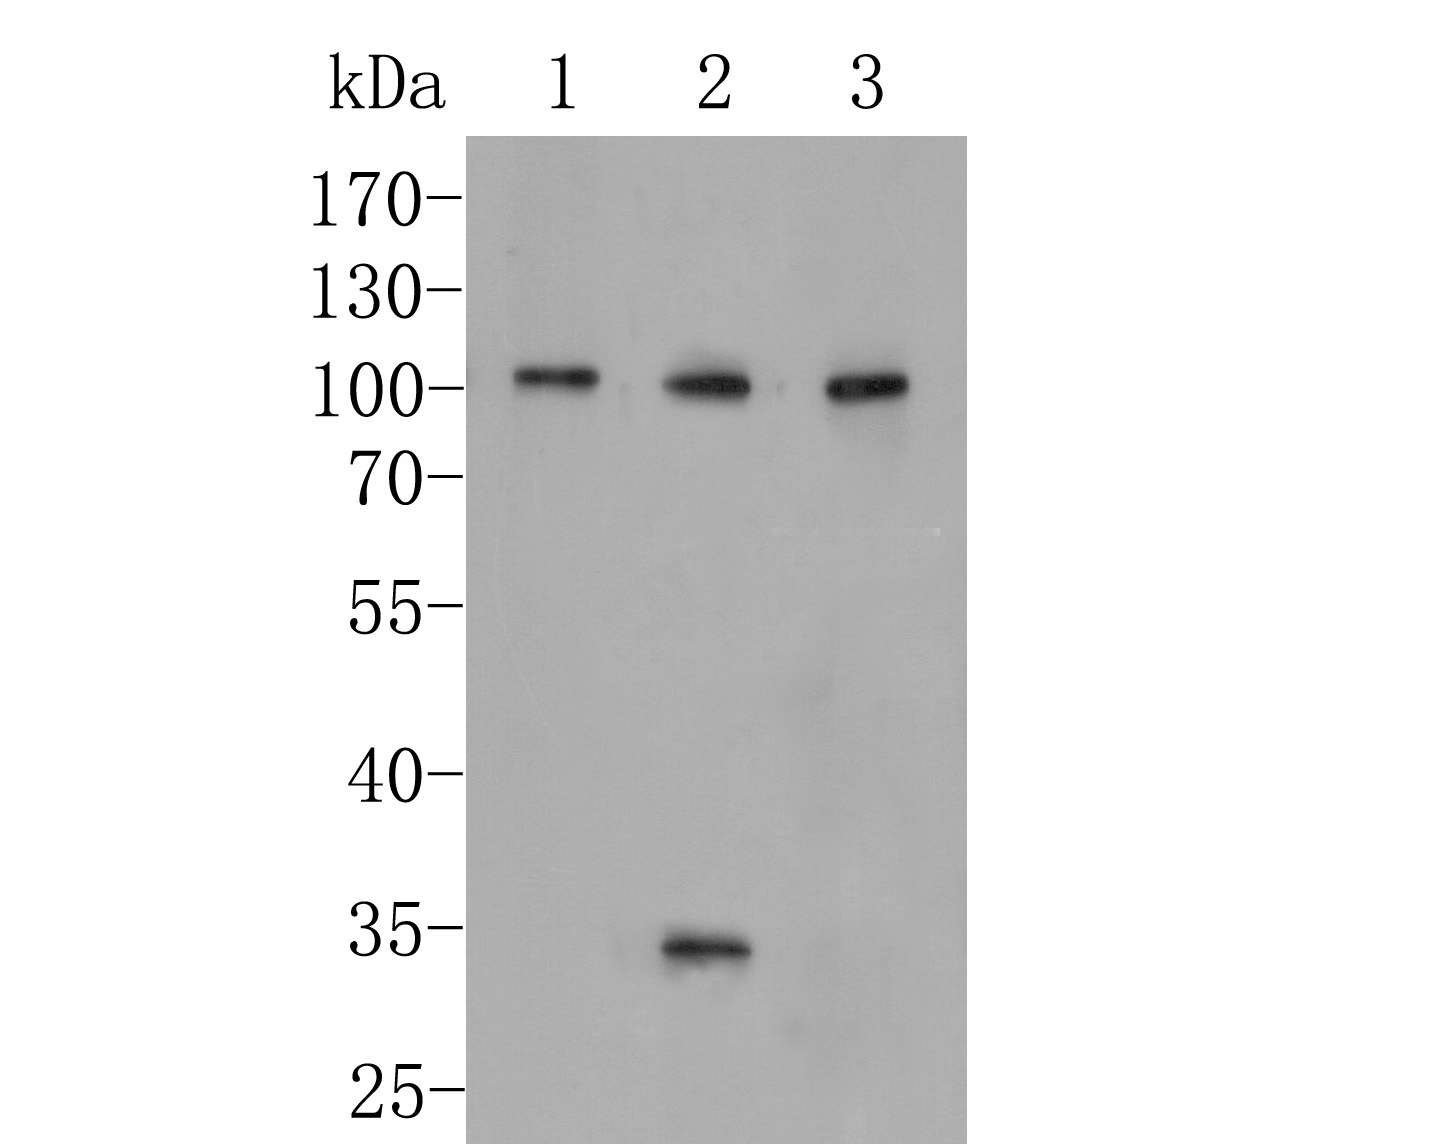 ICC staining of CD166 in A431 cells (green). Formalin fixed cells were permeabilized with 0.1% Triton X-100 in TBS for 10 minutes at room temperature and blocked with 1% Blocker BSA for 15 minutes at room temperature. Cells were probed with the primary antibody (EM1902-36, 1/100) for 1 hour at room temperature, washed with PBS. Alexa Fluor®488 Goat anti-Rabbit IgG was used as the secondary antibody at 1/100 dilution. The nuclear counter stain is DAPI (blue).